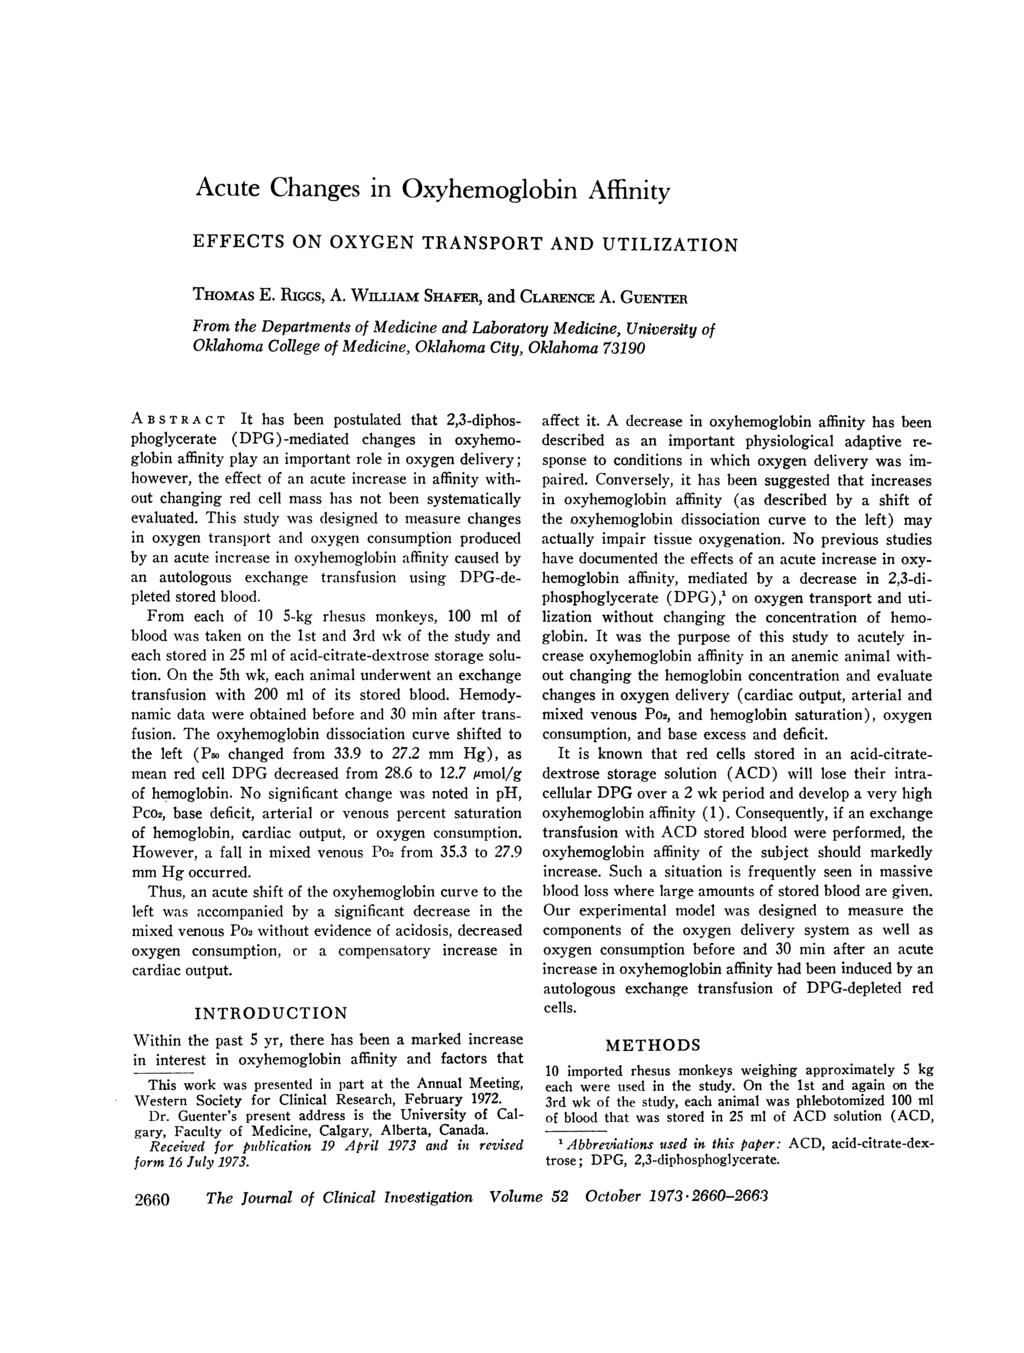 Acute Changes in Oxyhemoglobin Affinity EFFECTS ON OXYGEN TRANSPORT AND UTILIZATION THOMAS E. RIGGS, A. WILLIAM SHAFER, and CLARENCE A.